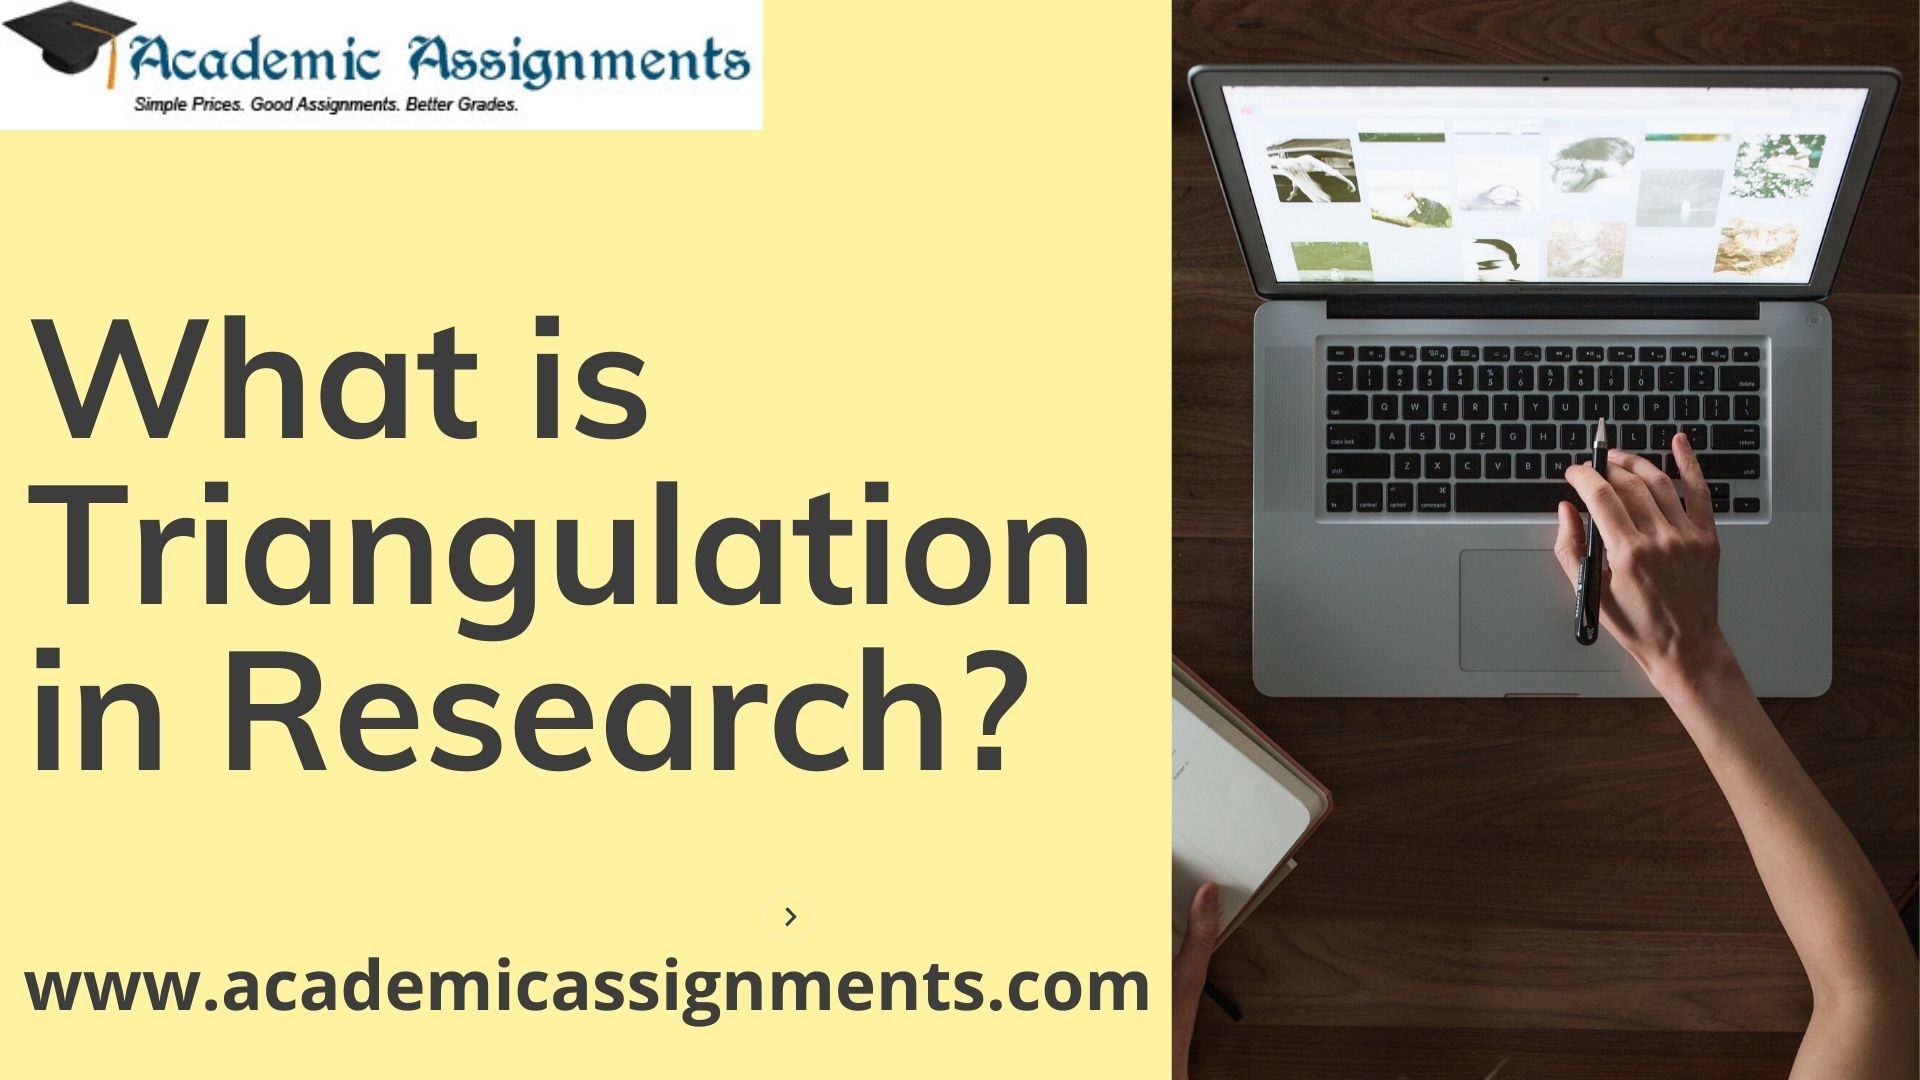 What is Triangulation in Research